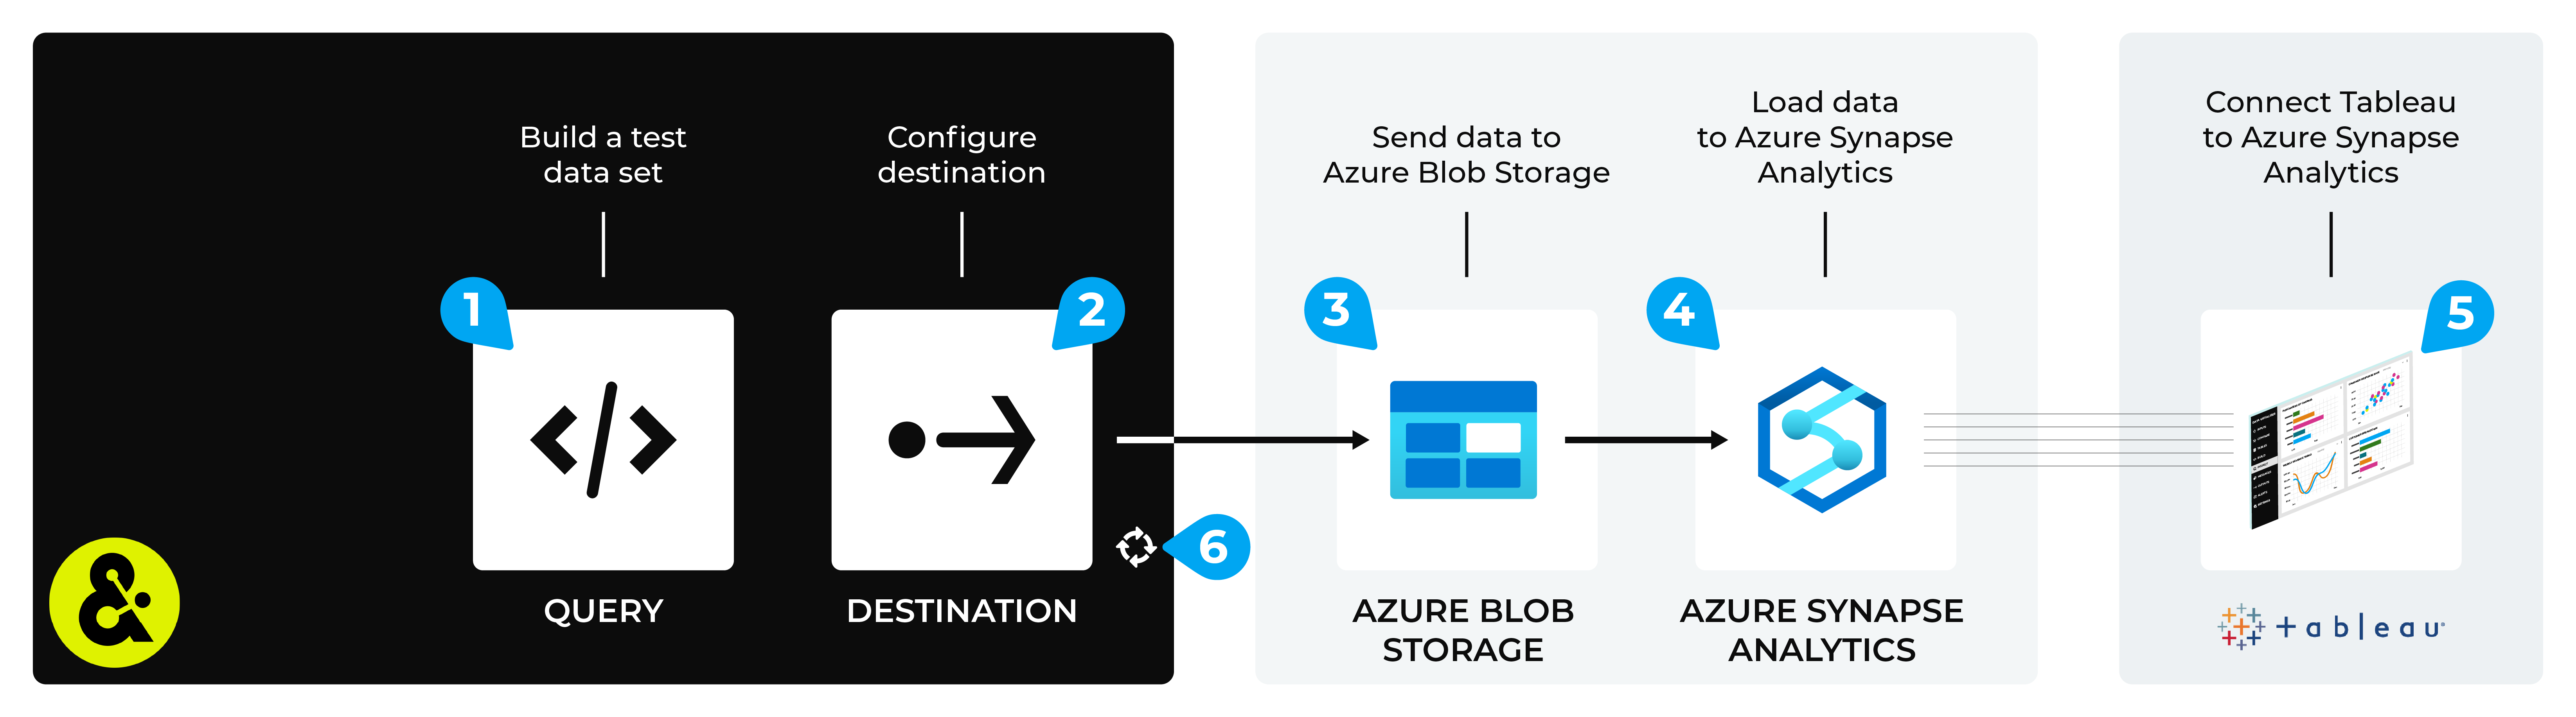 Connect Tableau to Azure Synapse Analytics.